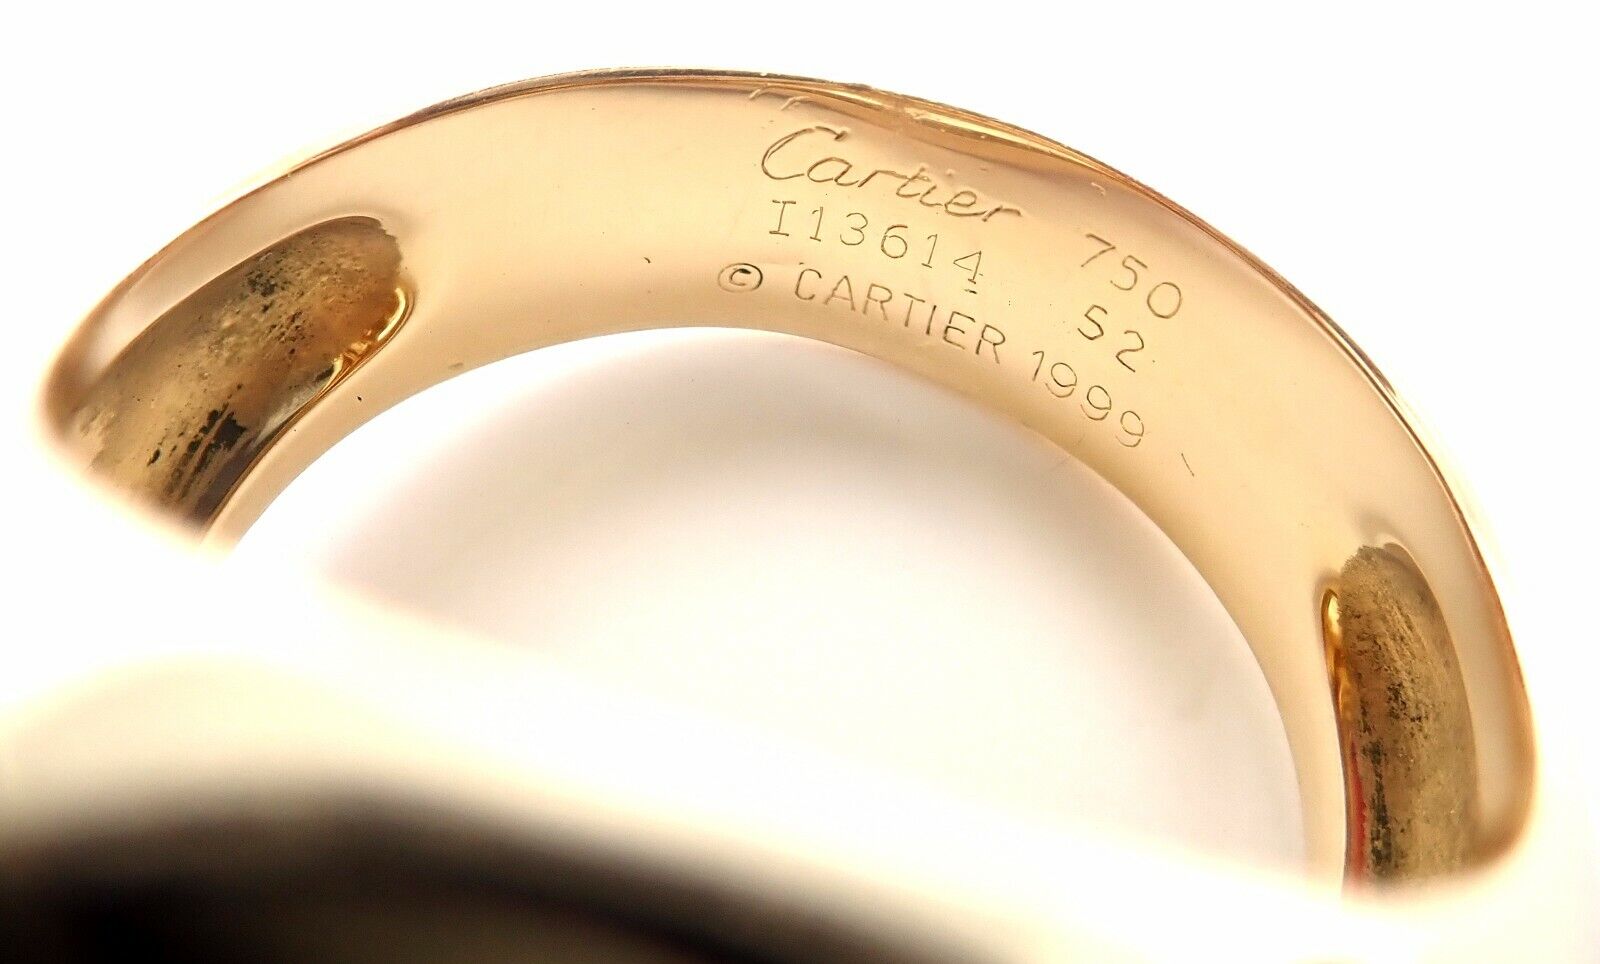 Cartier Jewelry & Watches:Fine Jewelry:Rings Rare! Authentic Cartier 18K Yellow Gold High Polish Large Dome Ring